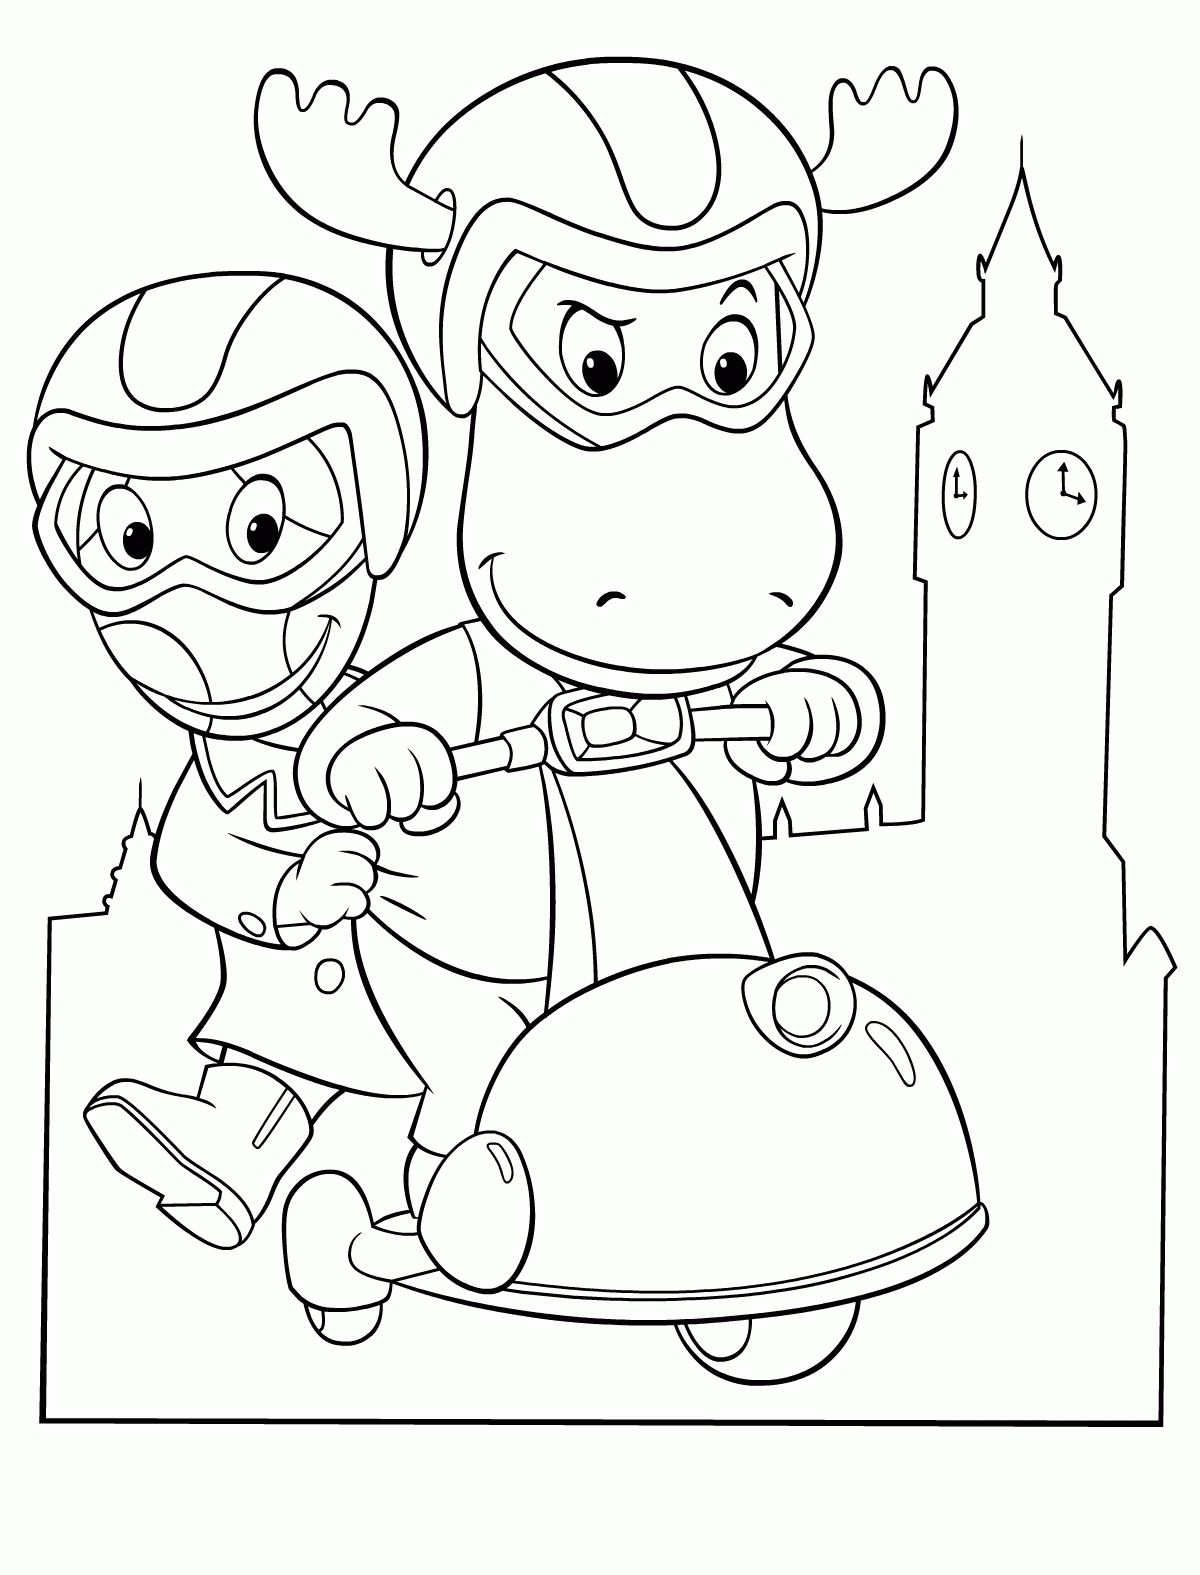 Printable Backyardigans Coloring Pages | Coloring Me